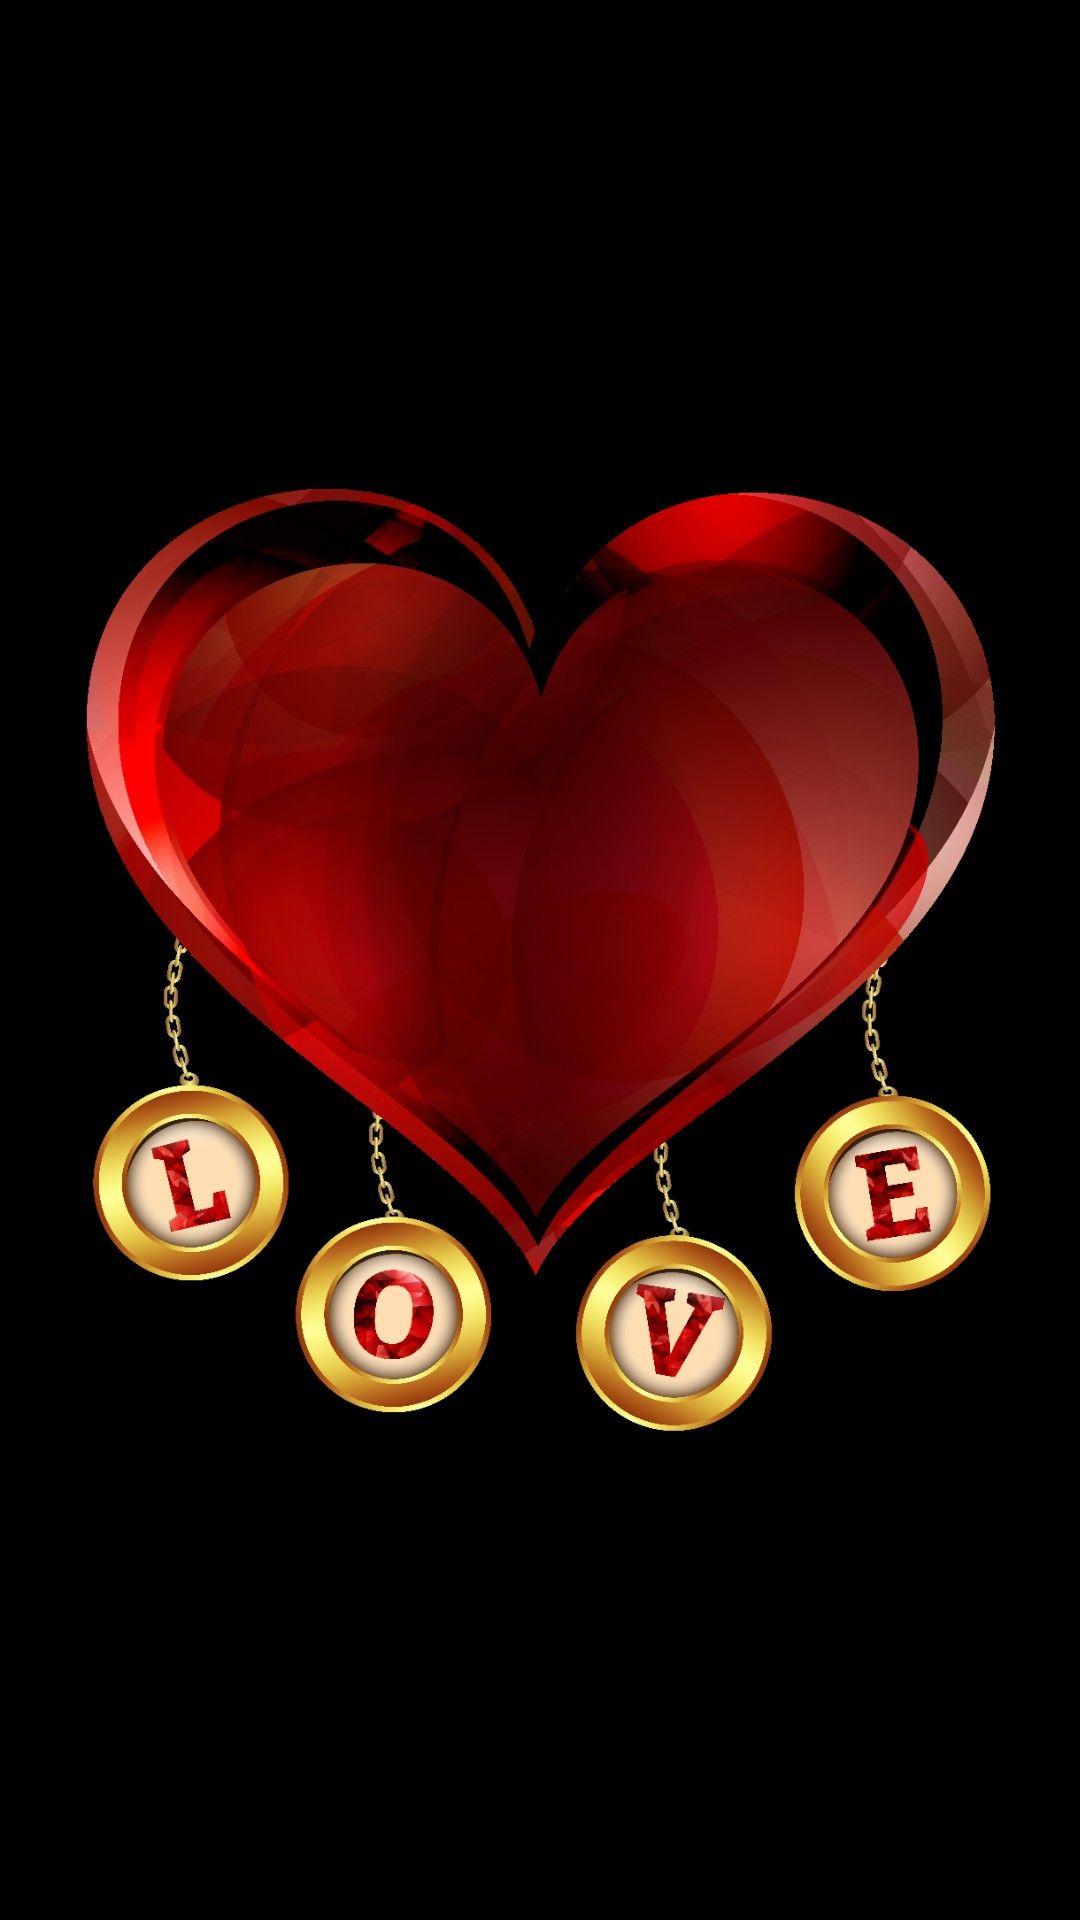 Love Mobile Wallpapers - Top Free Love Mobile Backgrounds - WallpaperAccess